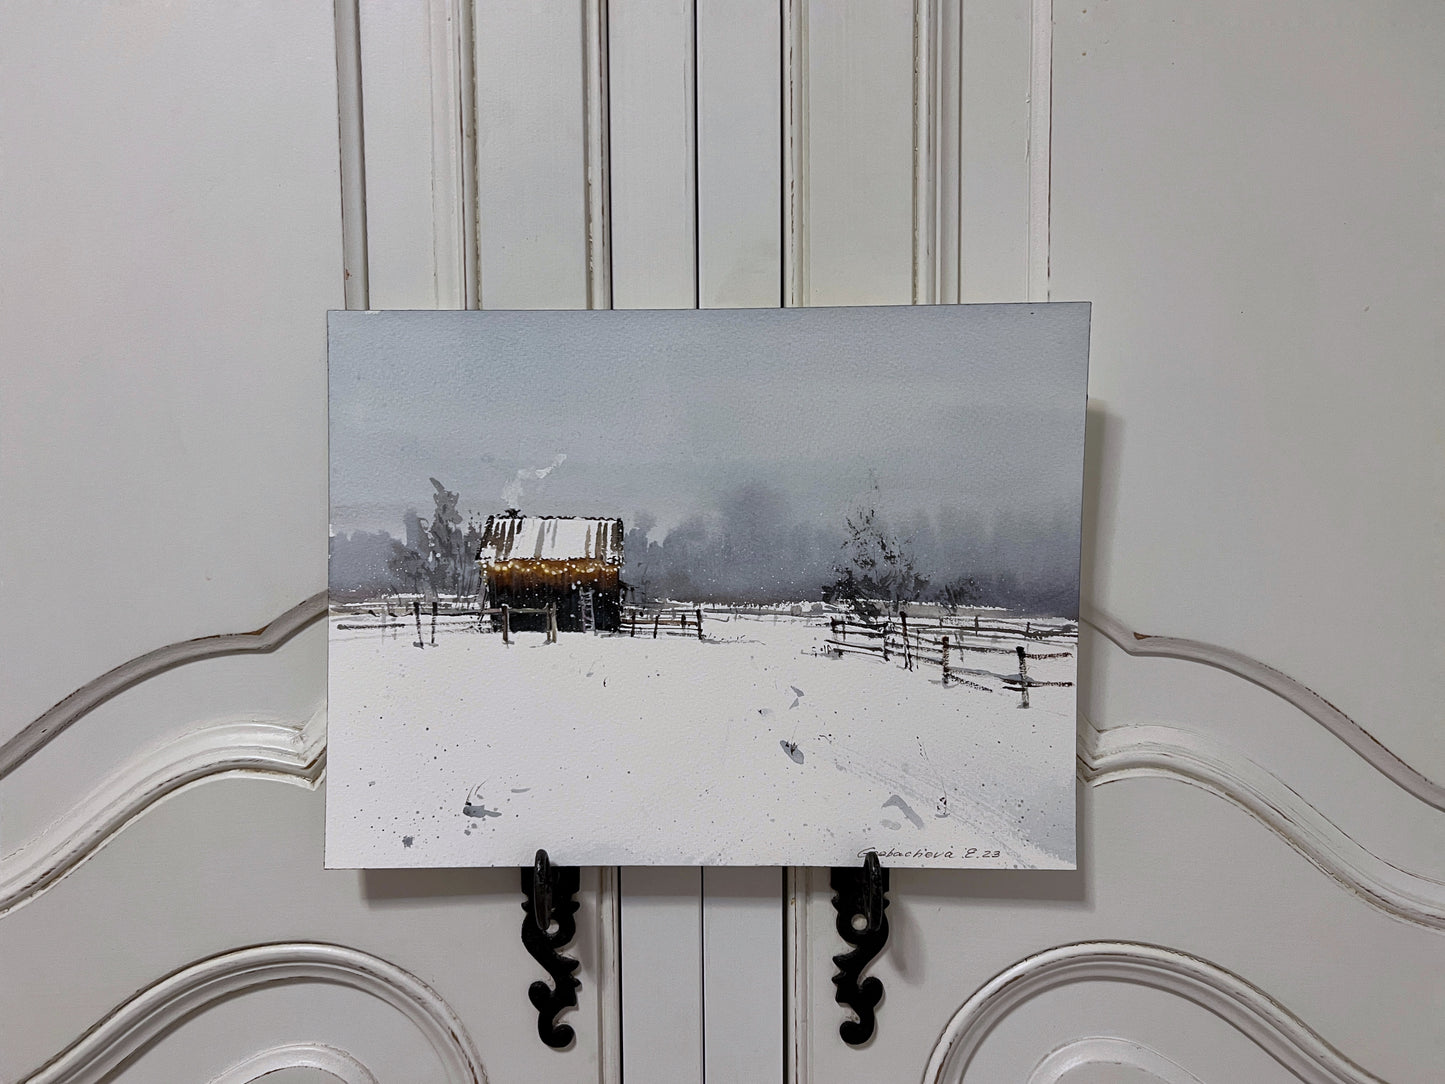 Winter Rural Small Painting, Original Watercolor Artwork, Christmas Morning, New Year Gift & Art Decor, Snowy Landscape